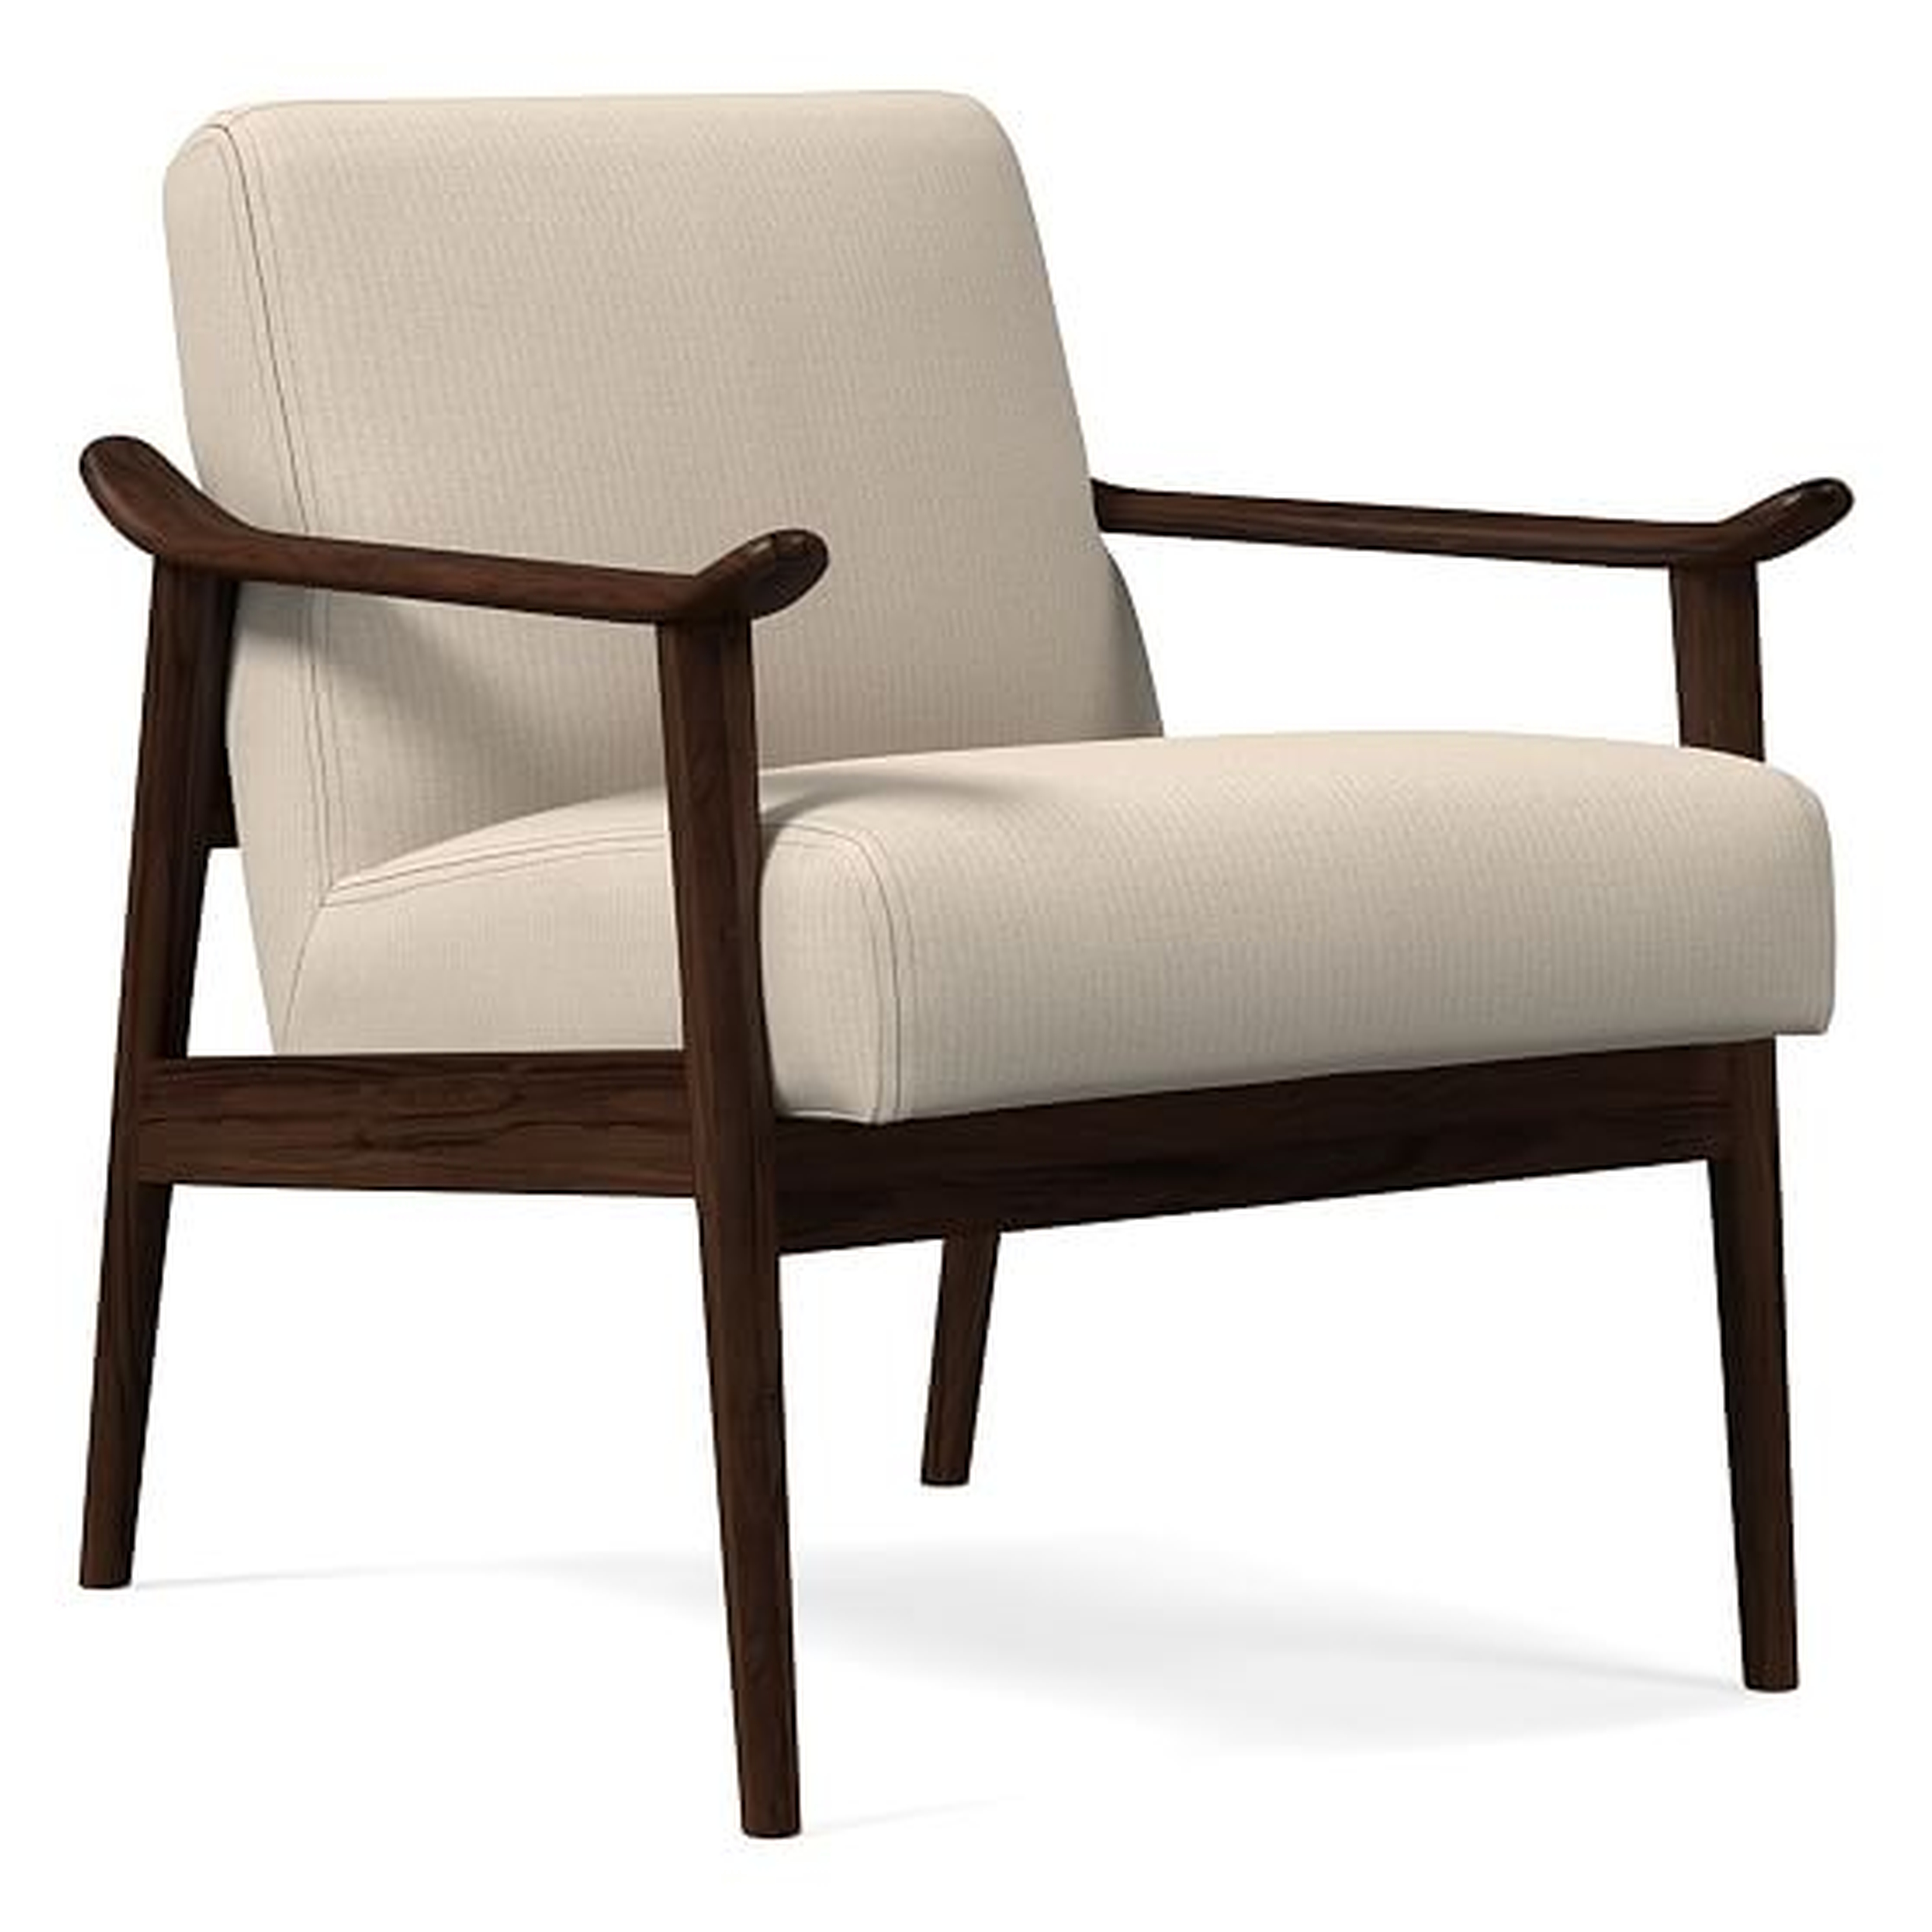 Midcentury Show Wood Chair, Poly, Performance Washed Canvas, Natural, Espresso - West Elm